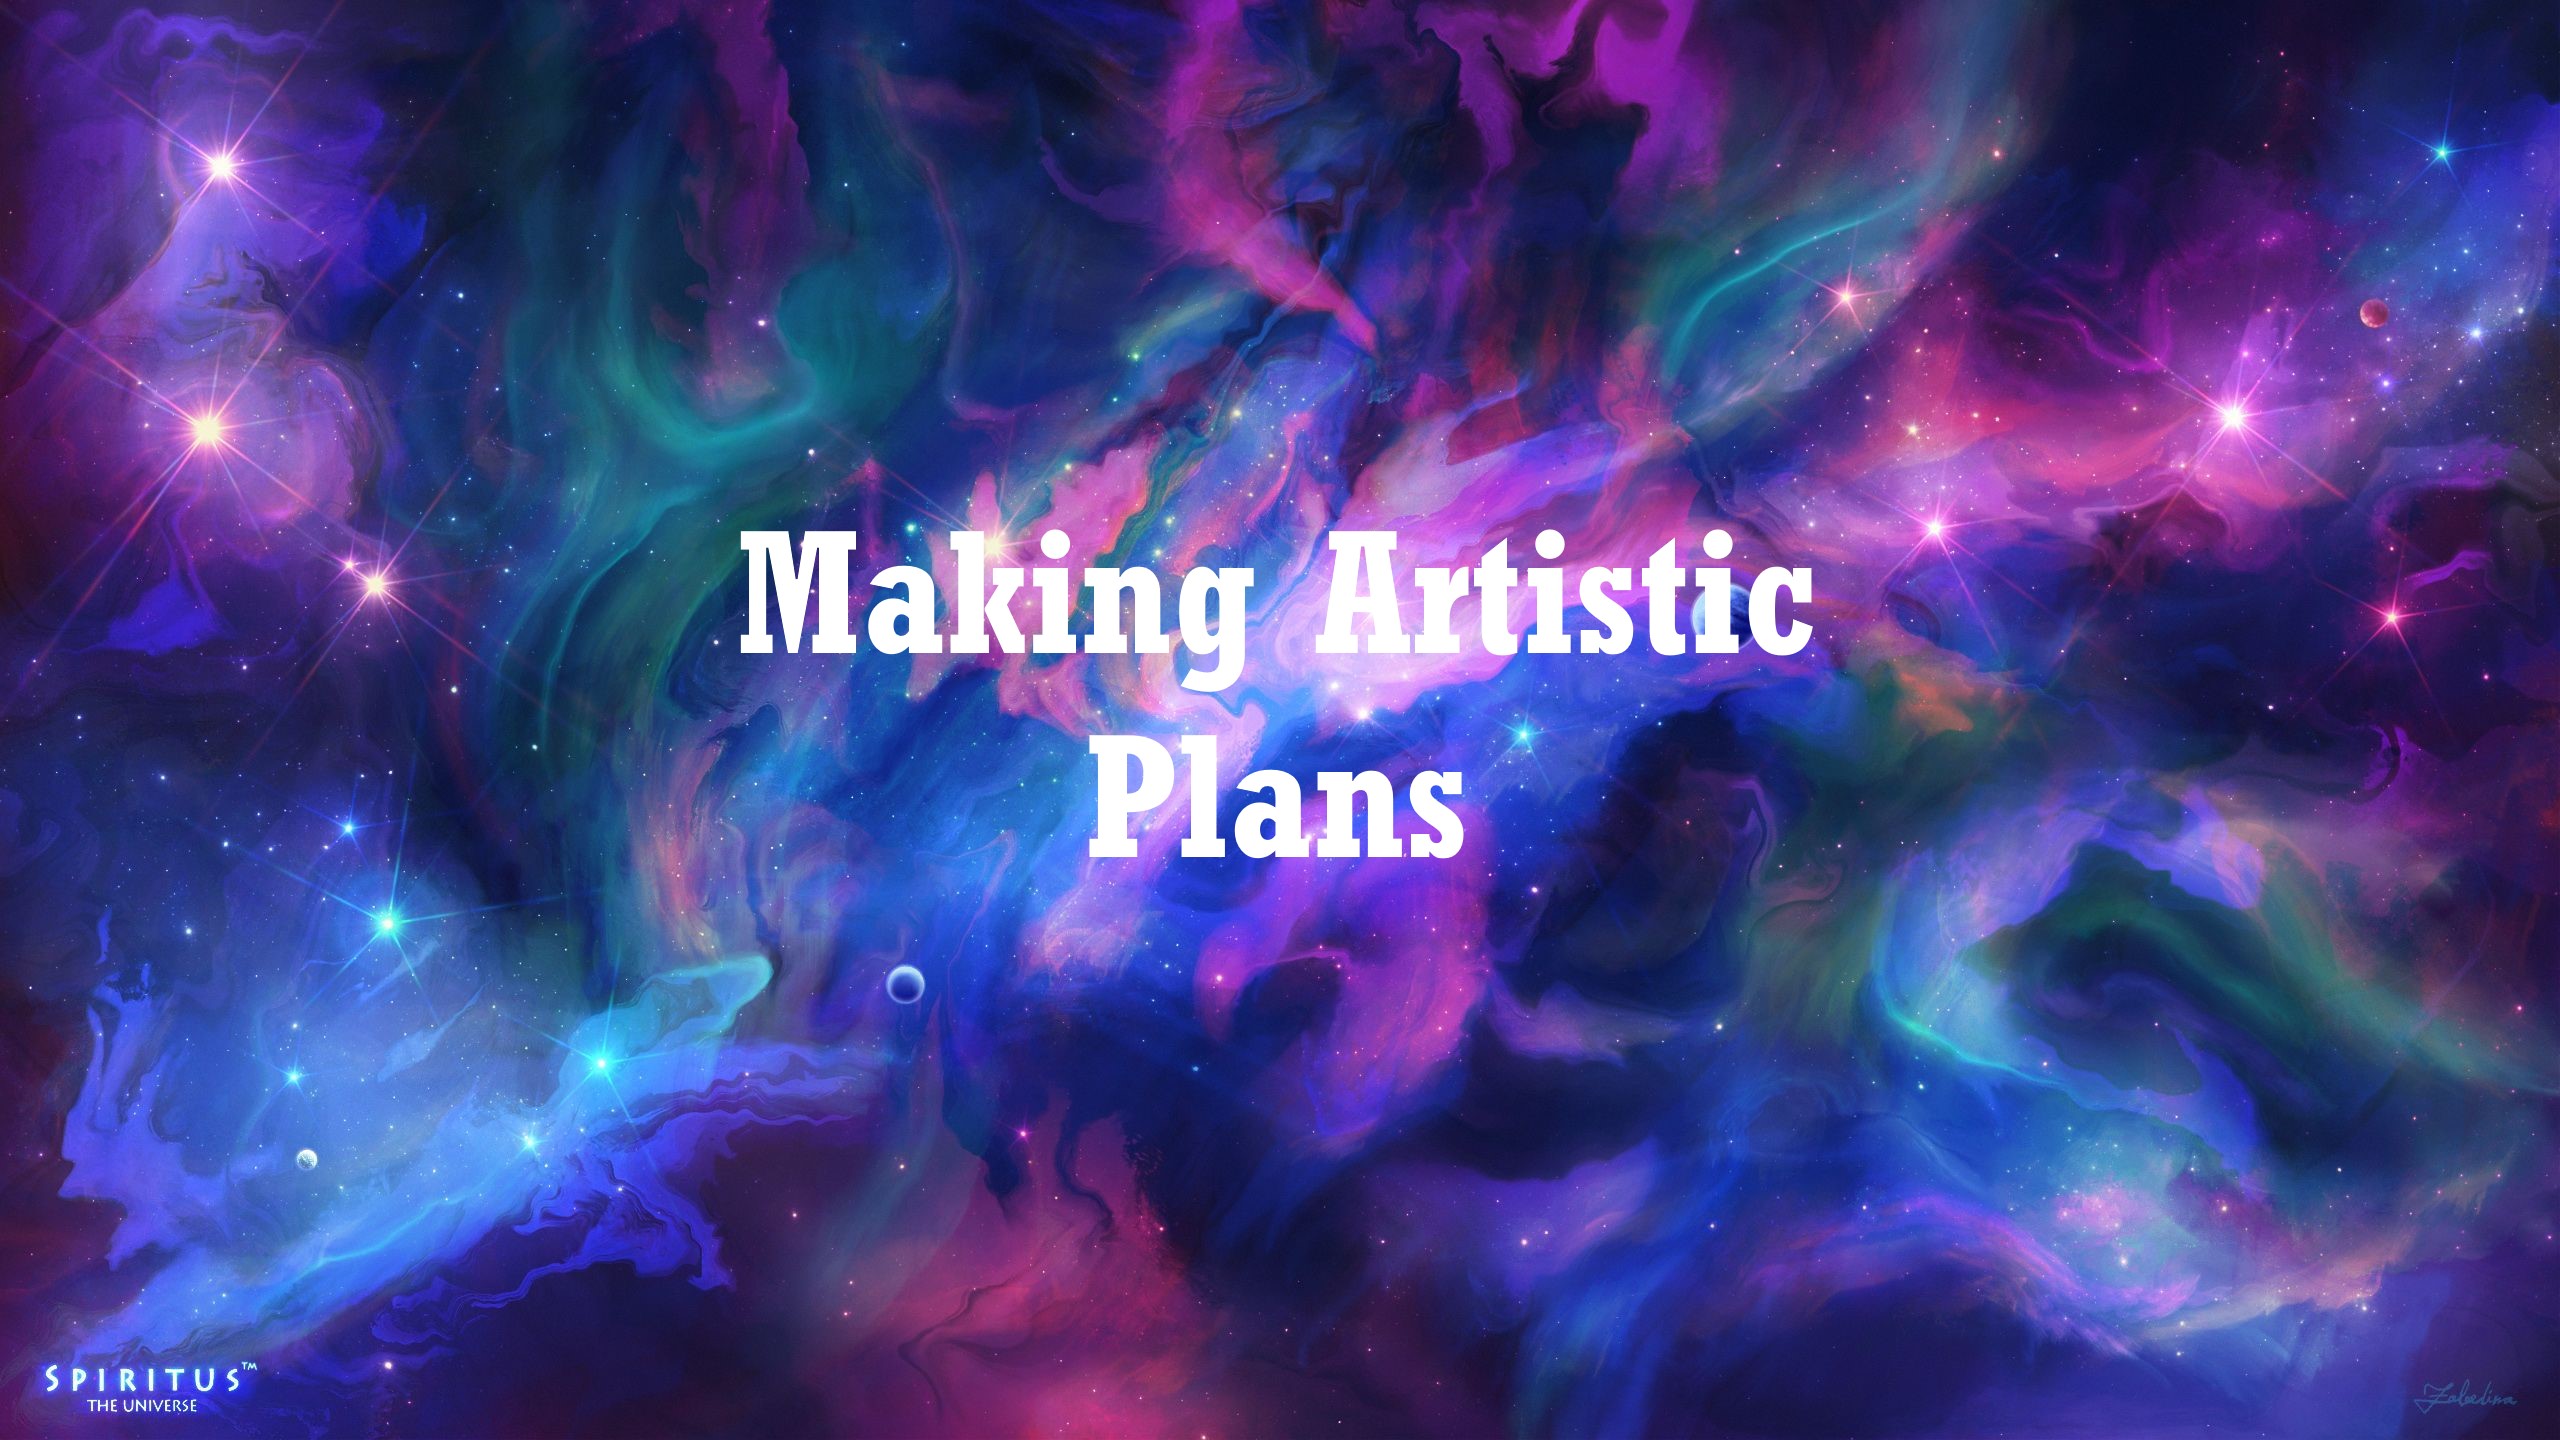 The Quest to Make My Artistic Plans For the Rest of The Year